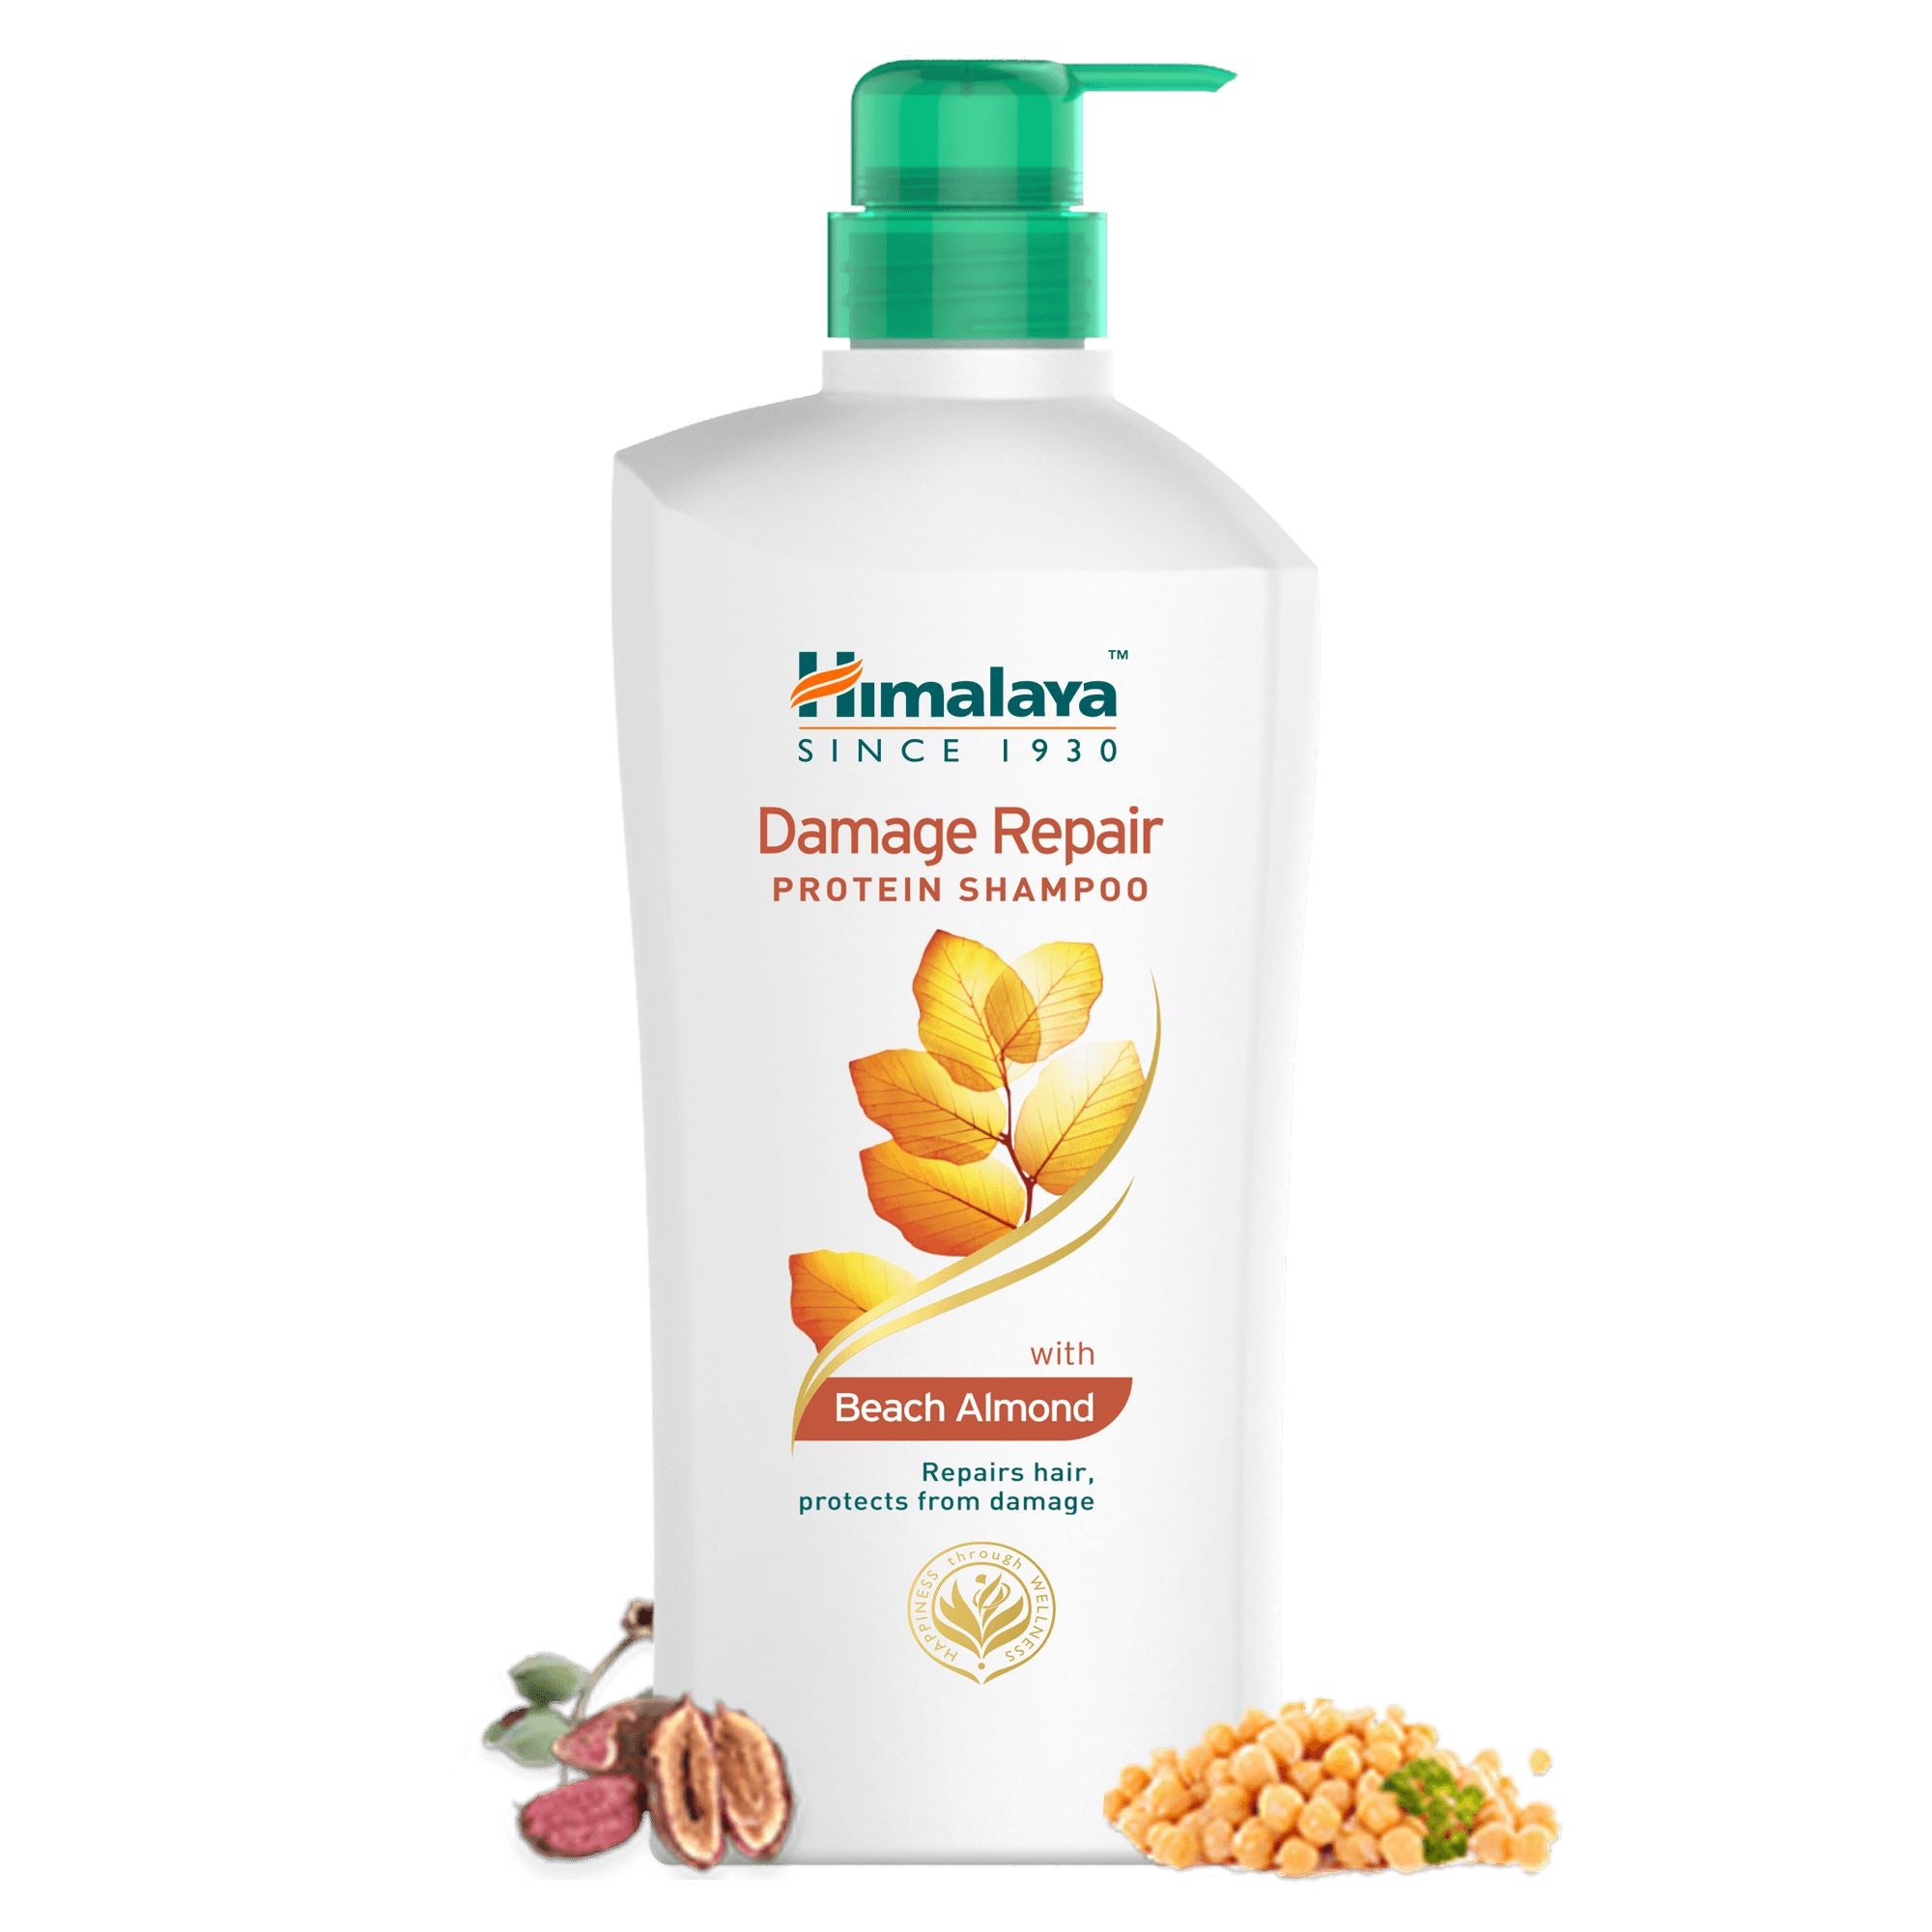 Himalaya Damage Repair Protein Shampoo 700ml - For dry, frizzy and damaged hair